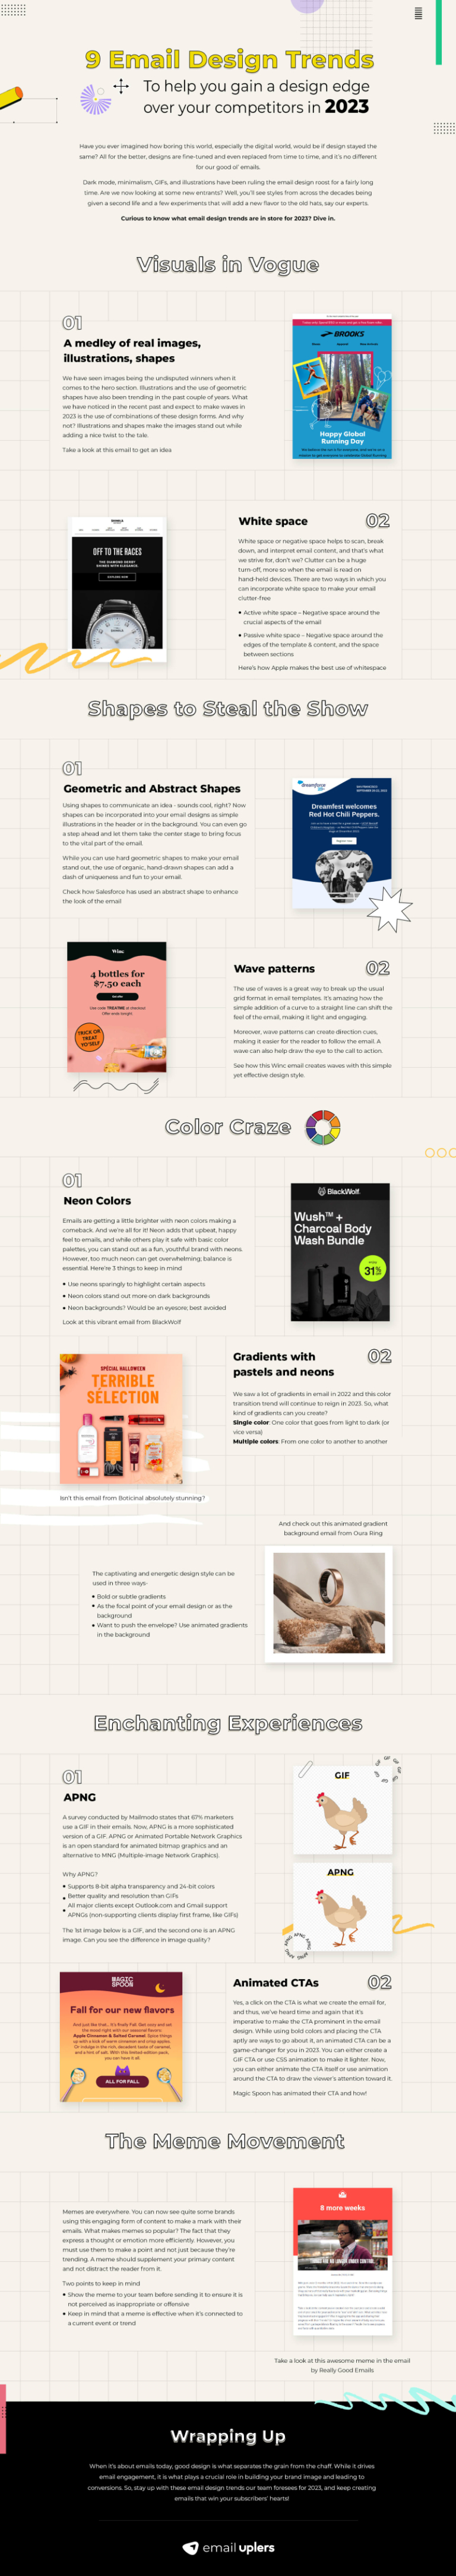 Email Design Trends infographic